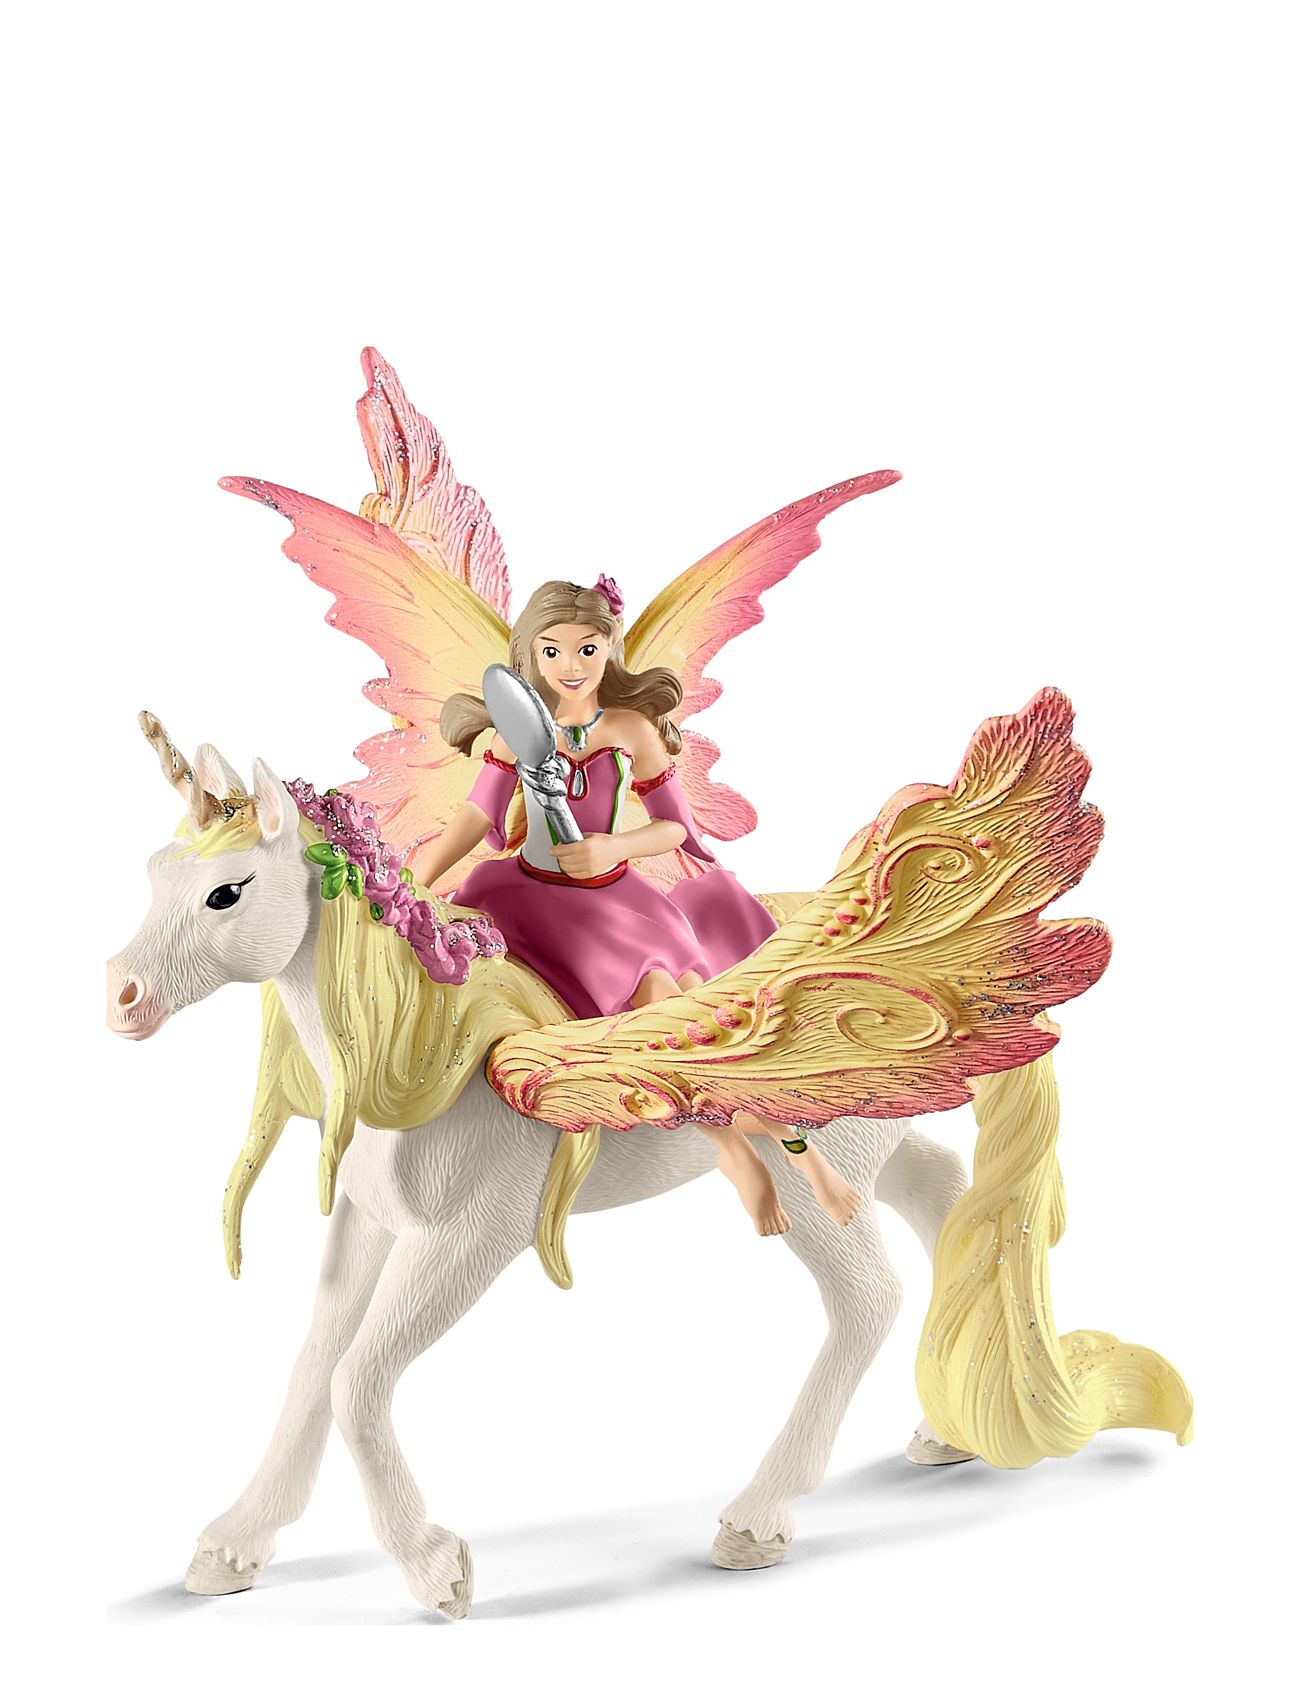 Schleich Fairy Feya With Pegasus Unicorn Toys Playsets & Action Figures Animals Multi/patterned Schleich